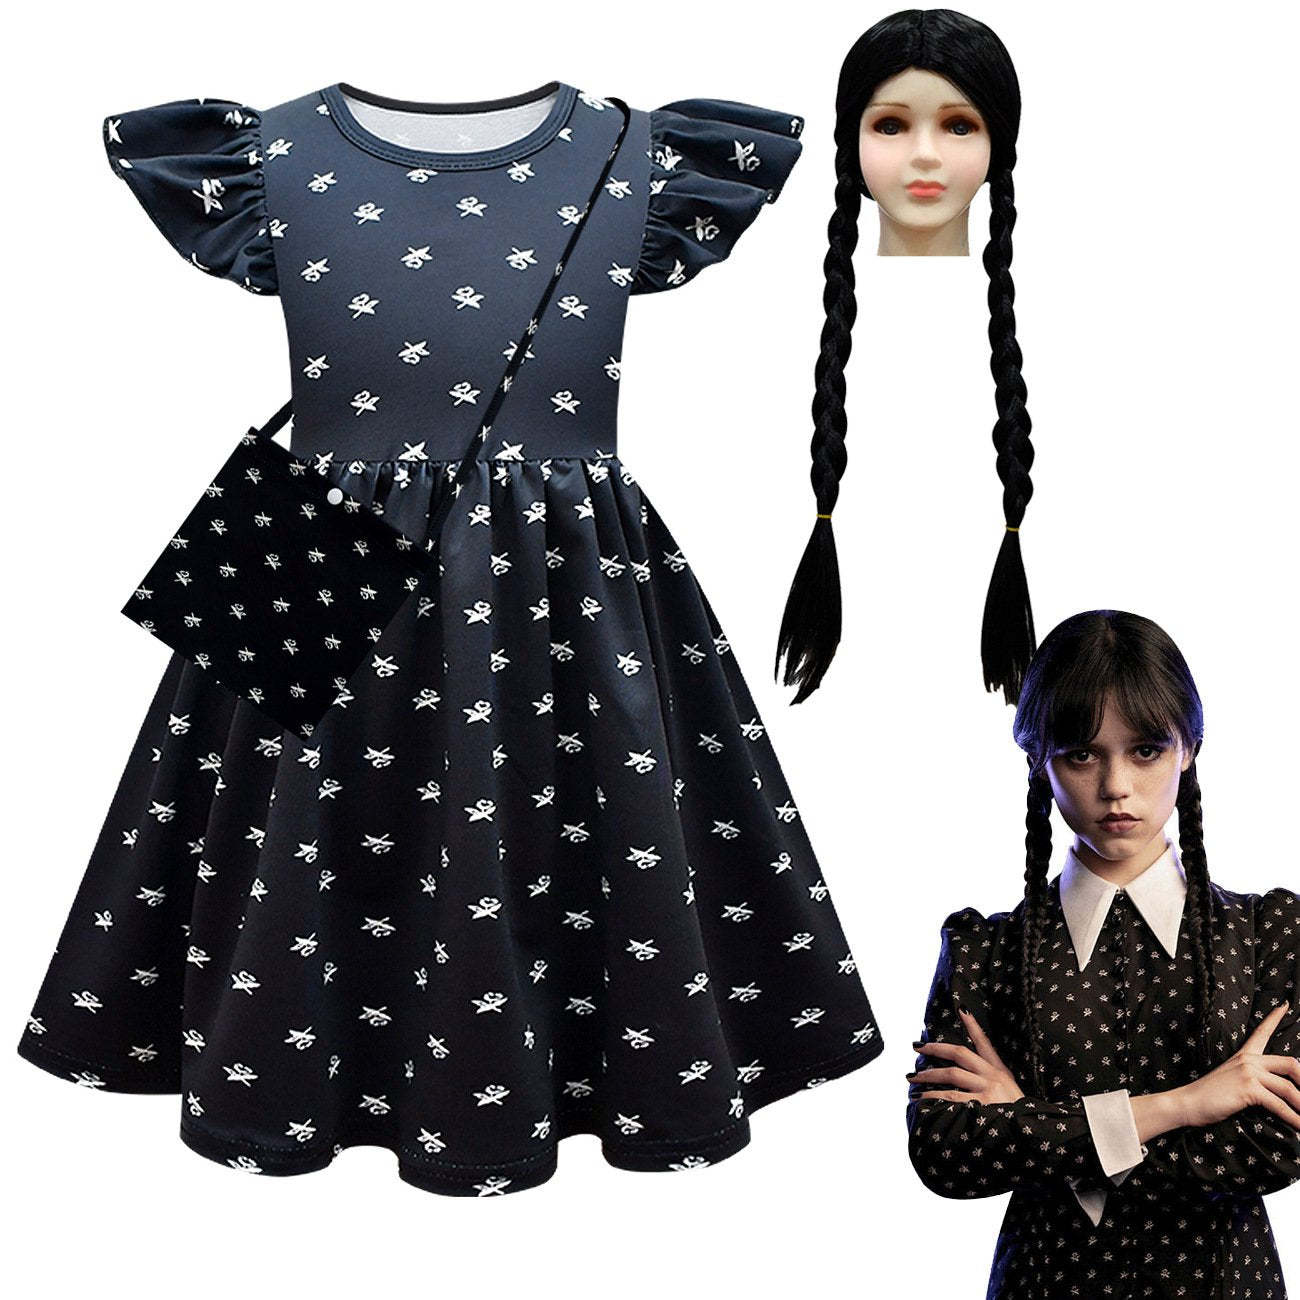 Wednesday Costume The Addams Family Cosplay Flying Sleeve Printed Dress For Kids